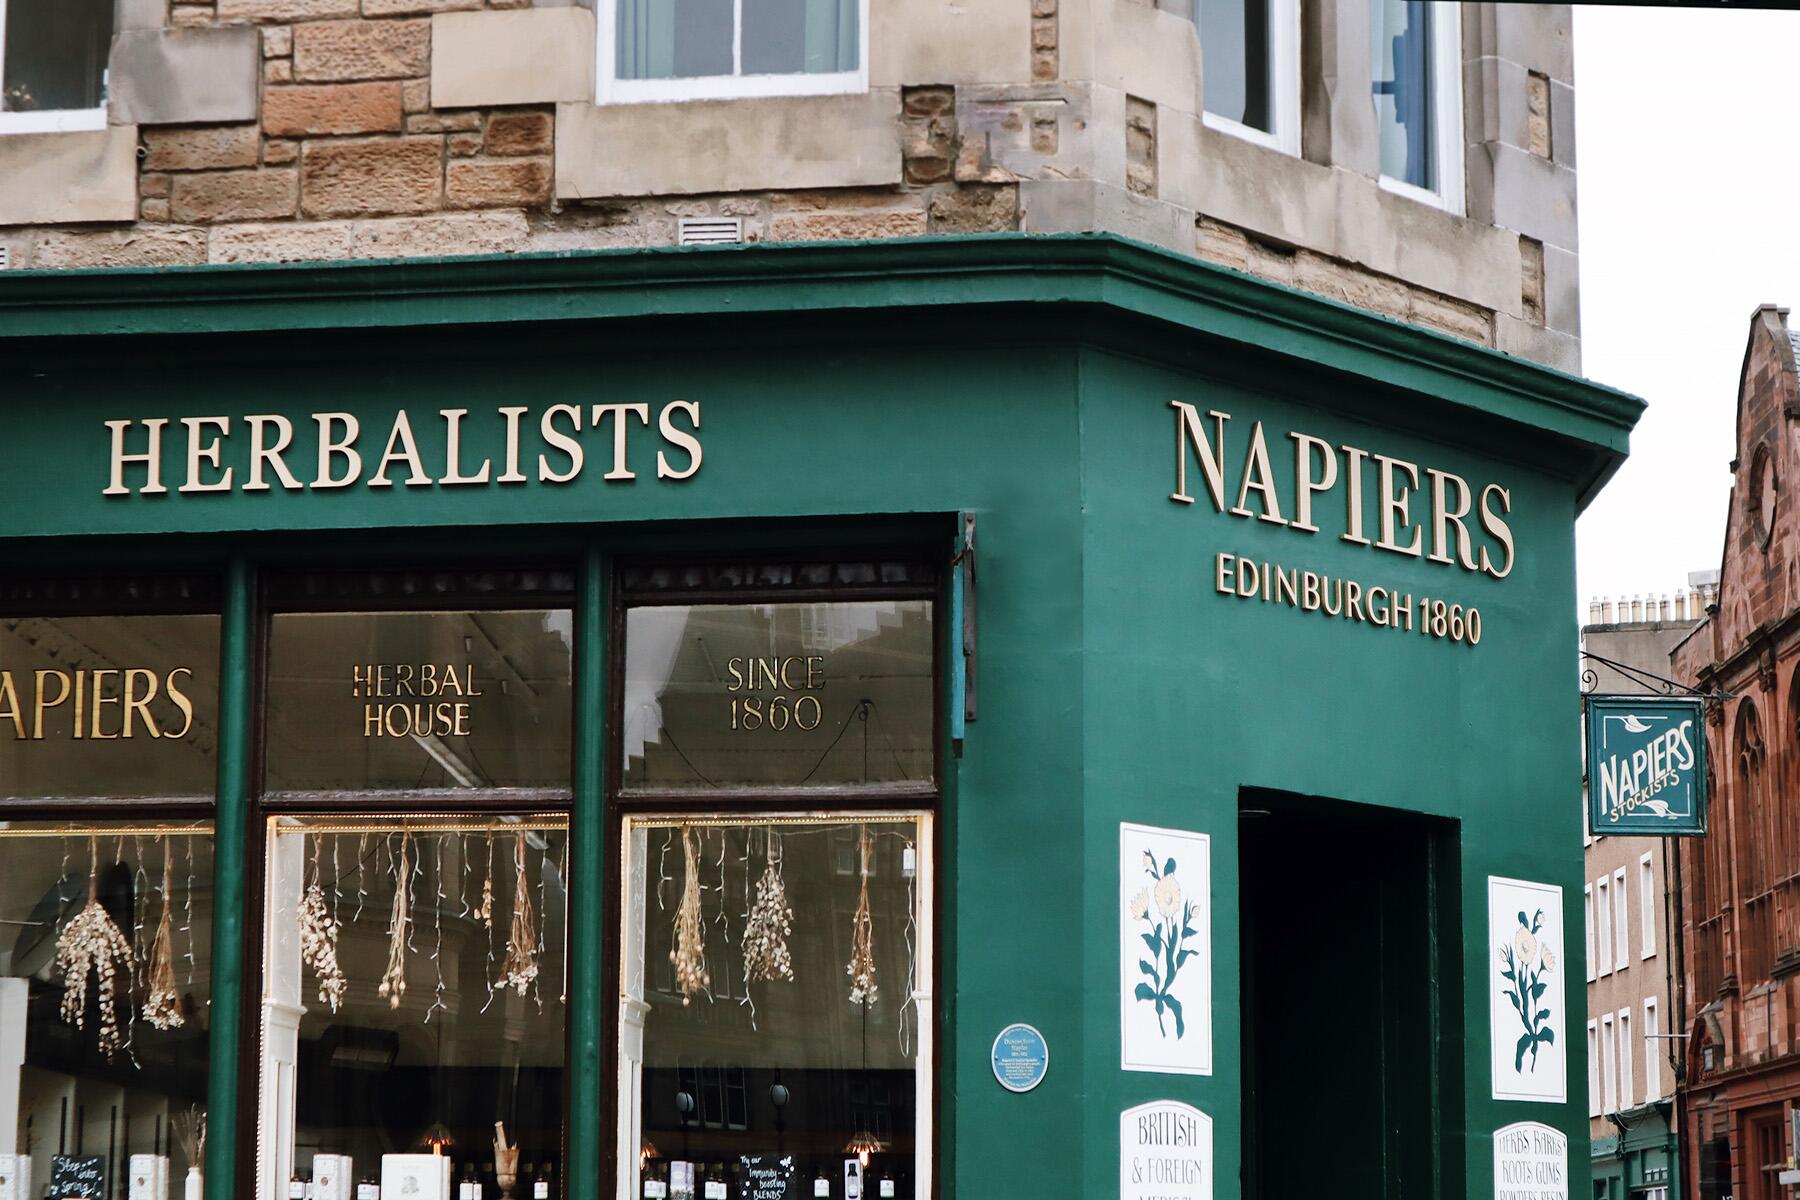 <a href='https://www.fodors.com/world/europe/scotland/edinburgh-and-the-lothians/experiences/news/photos/best-boutique-shops-in-edinburgh#'>From &quot;The 10 Best Boutiques and Shops in Edinburgh: Napiers&quot;</a>